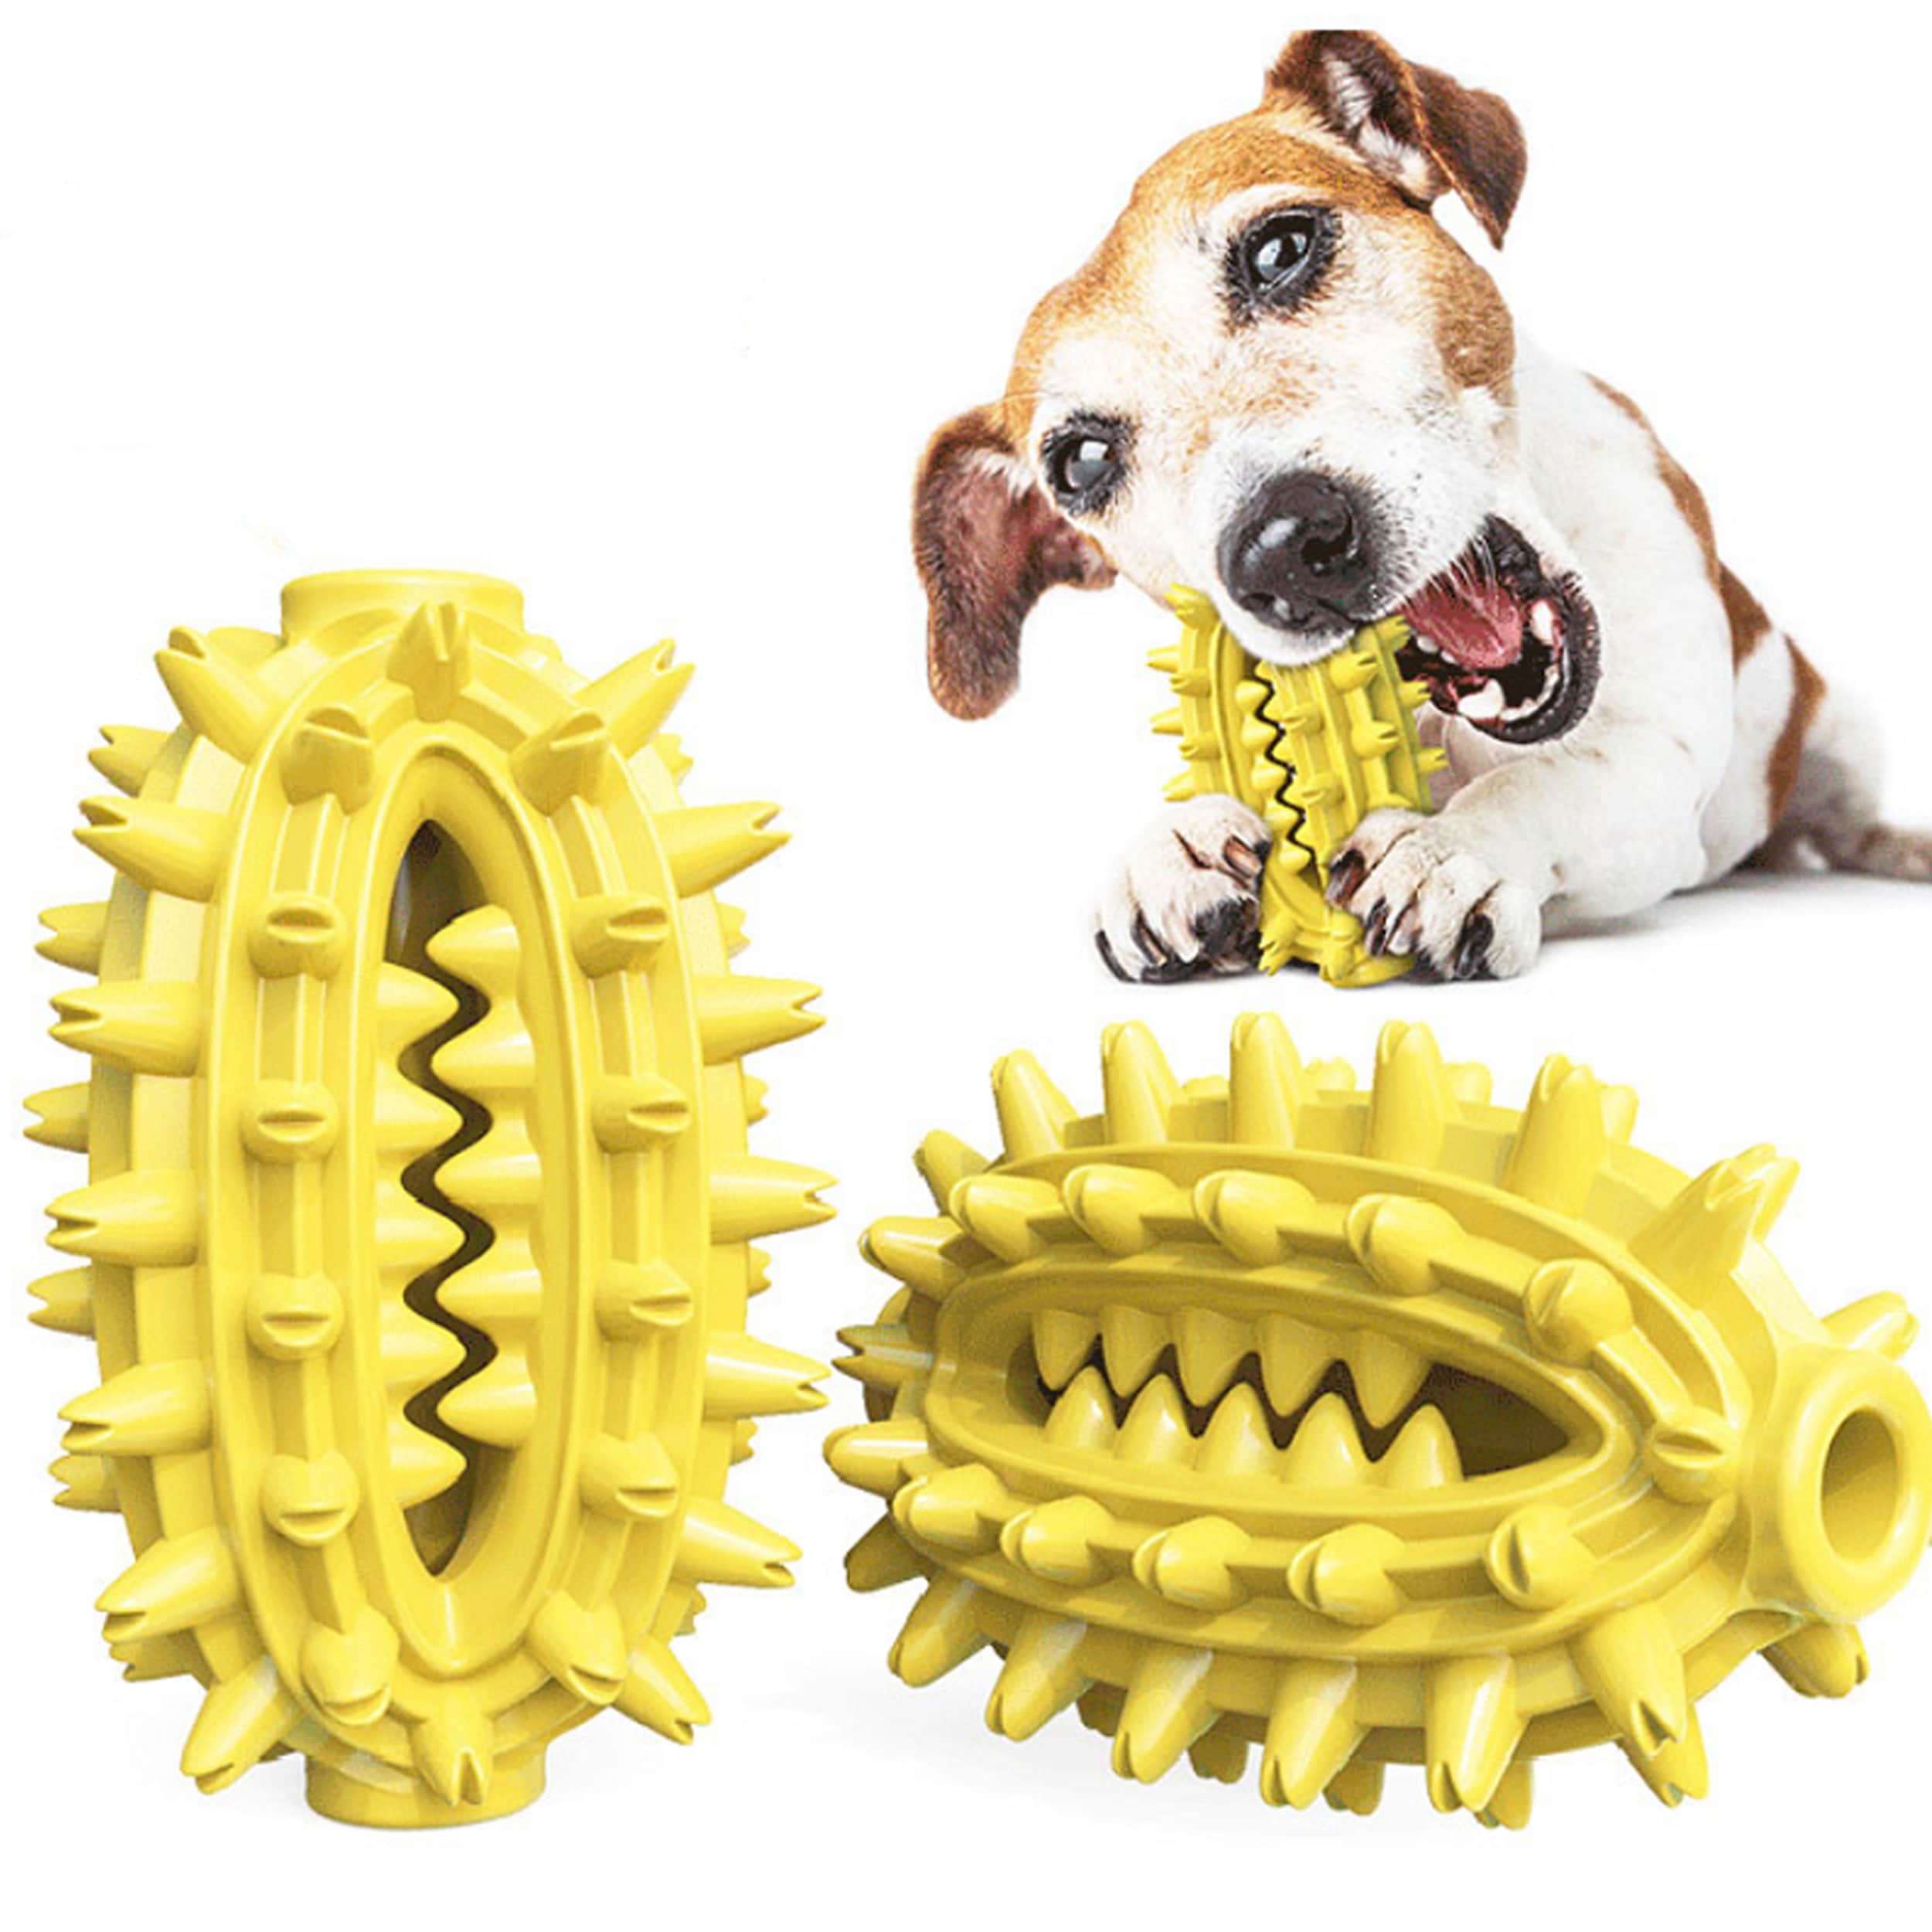 Keep Your Dog's Teeth & Gums Healthy With Durable Natural Rubber Dog Toy